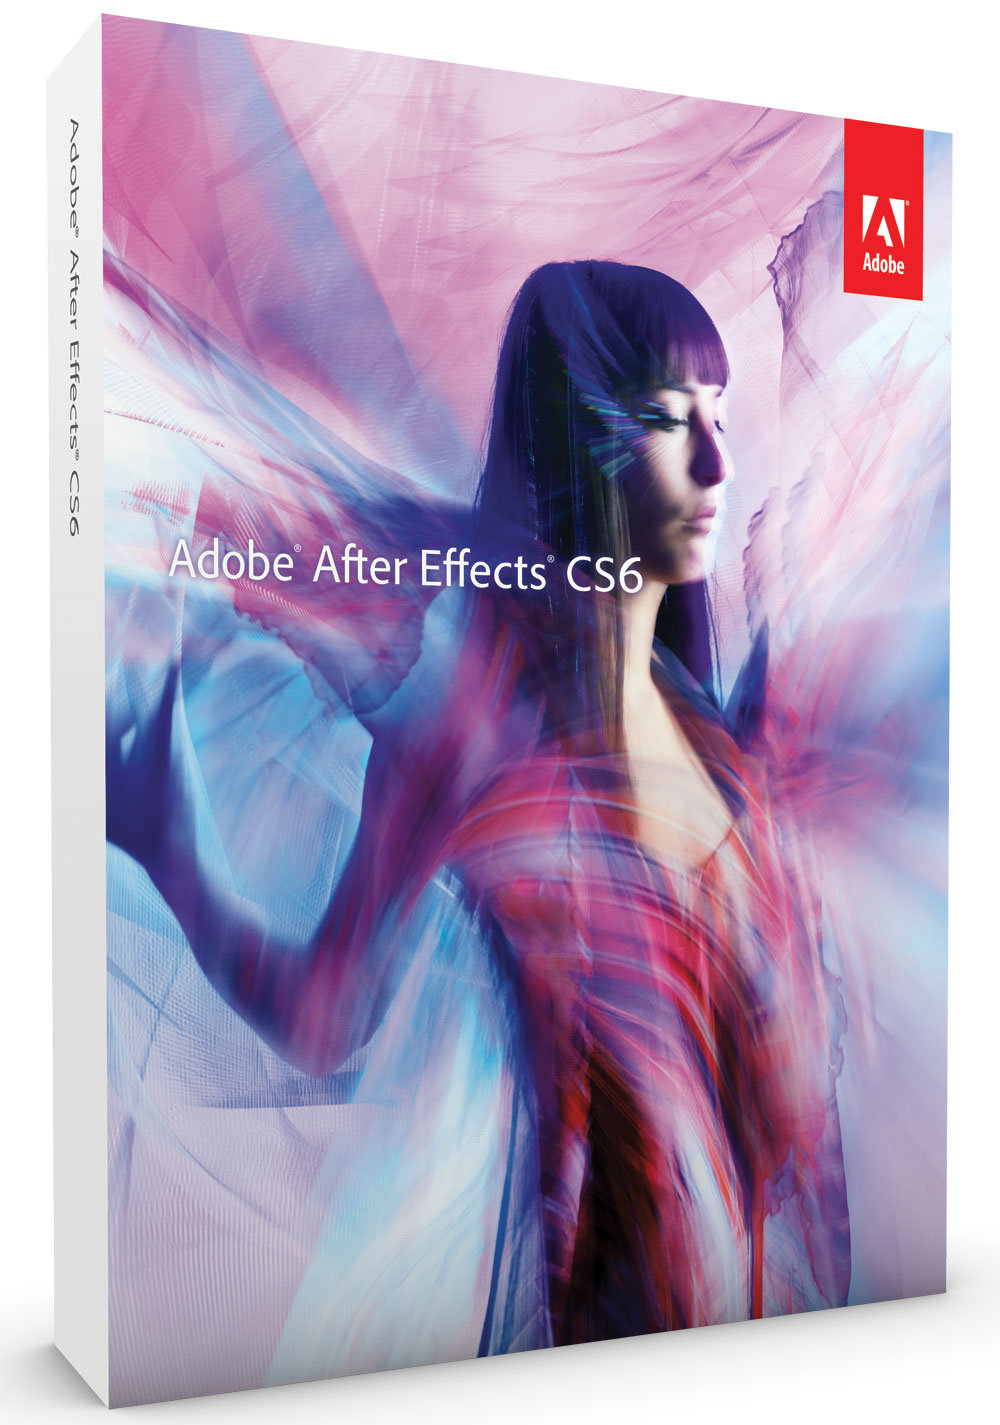 Adobe After Effects CS6 Portable + Curso completo